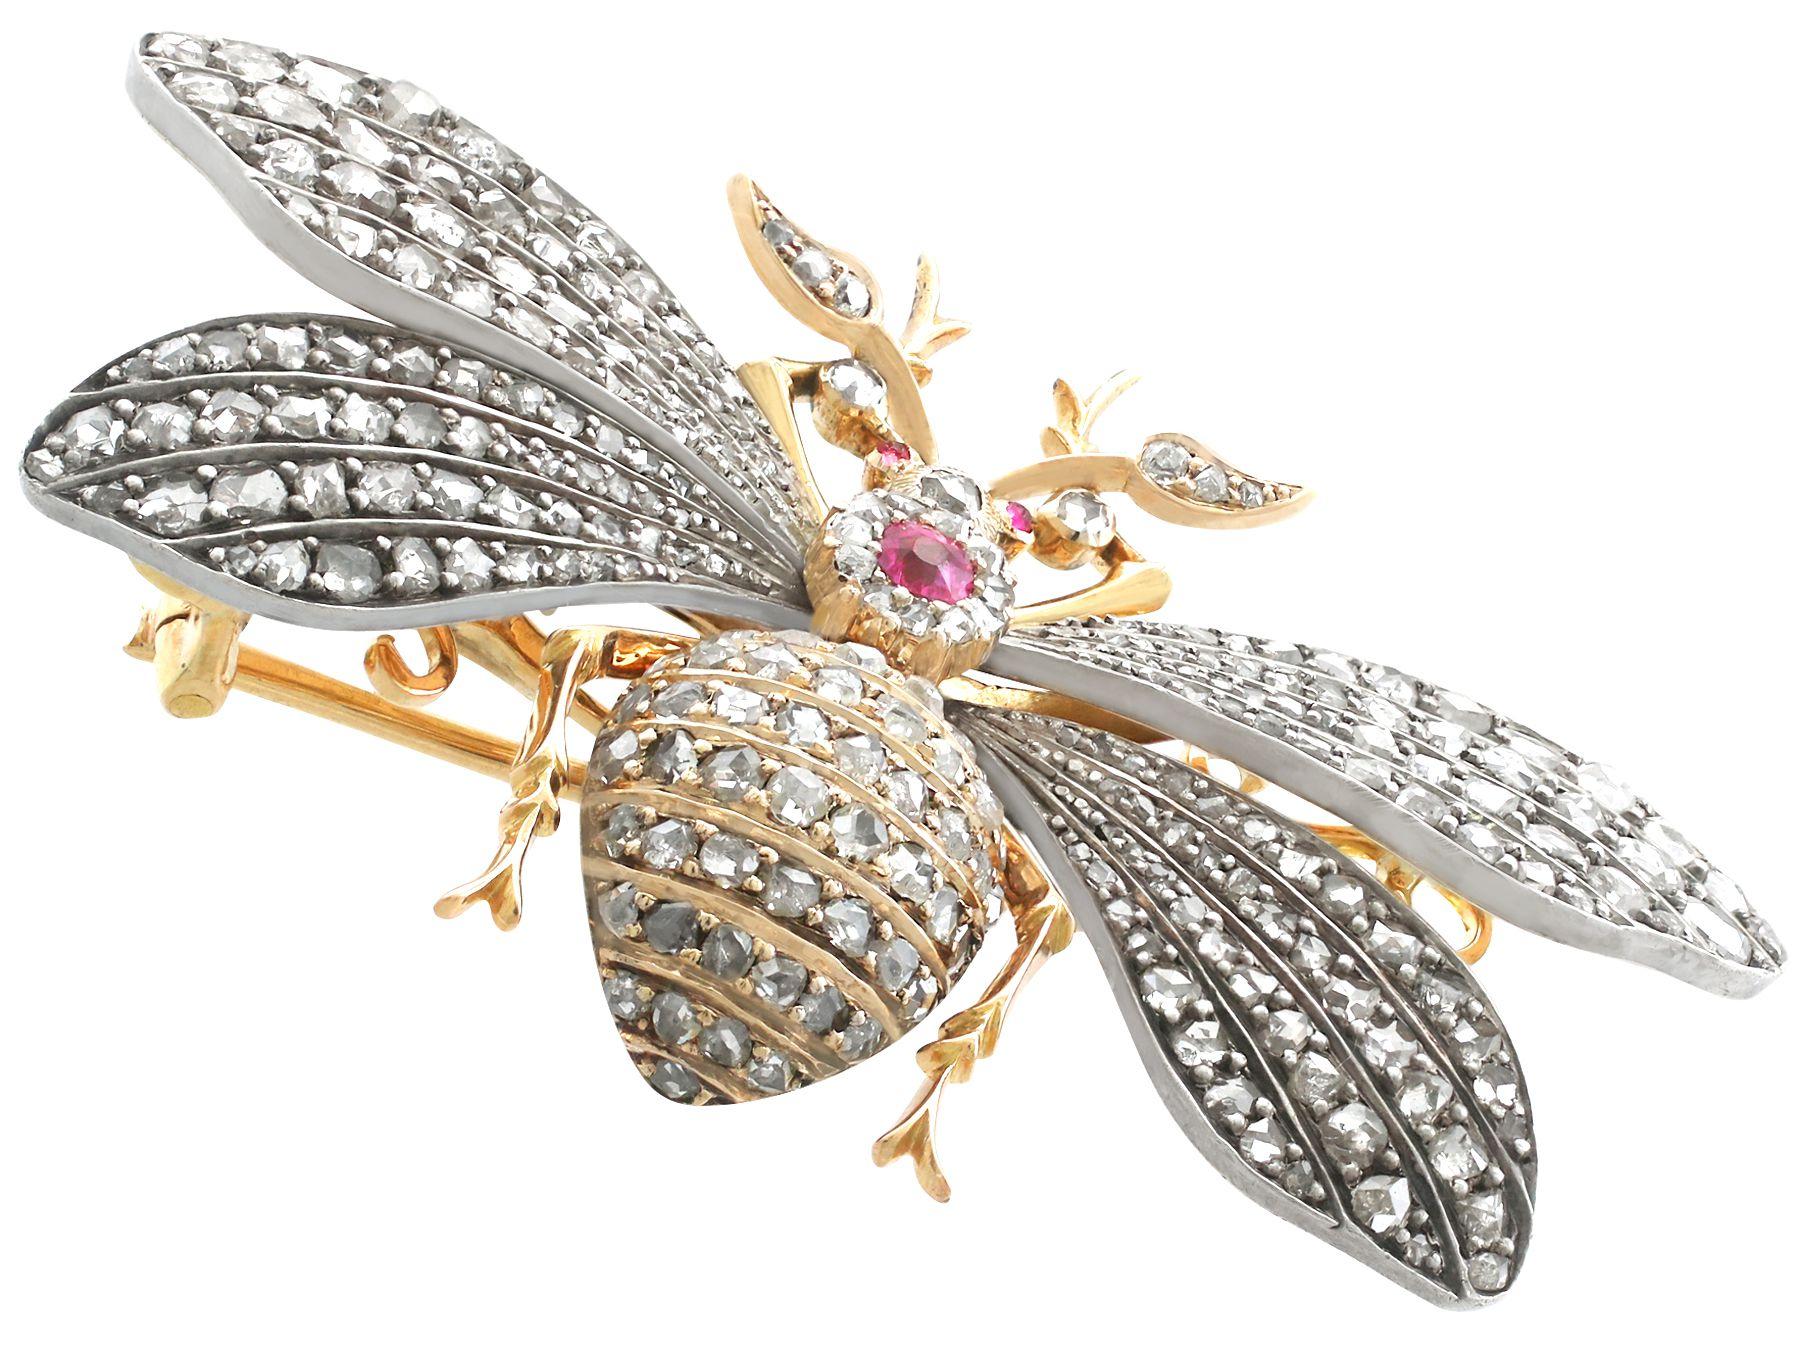 A stunning, fine and impressive antique 3.11 carat diamond and synthetic ruby, 15 karat yellow gold, silver set brooch in the form of a winged insect; part of our antique jewellery collections.

This stunning antique brooch has been crafted in 15k